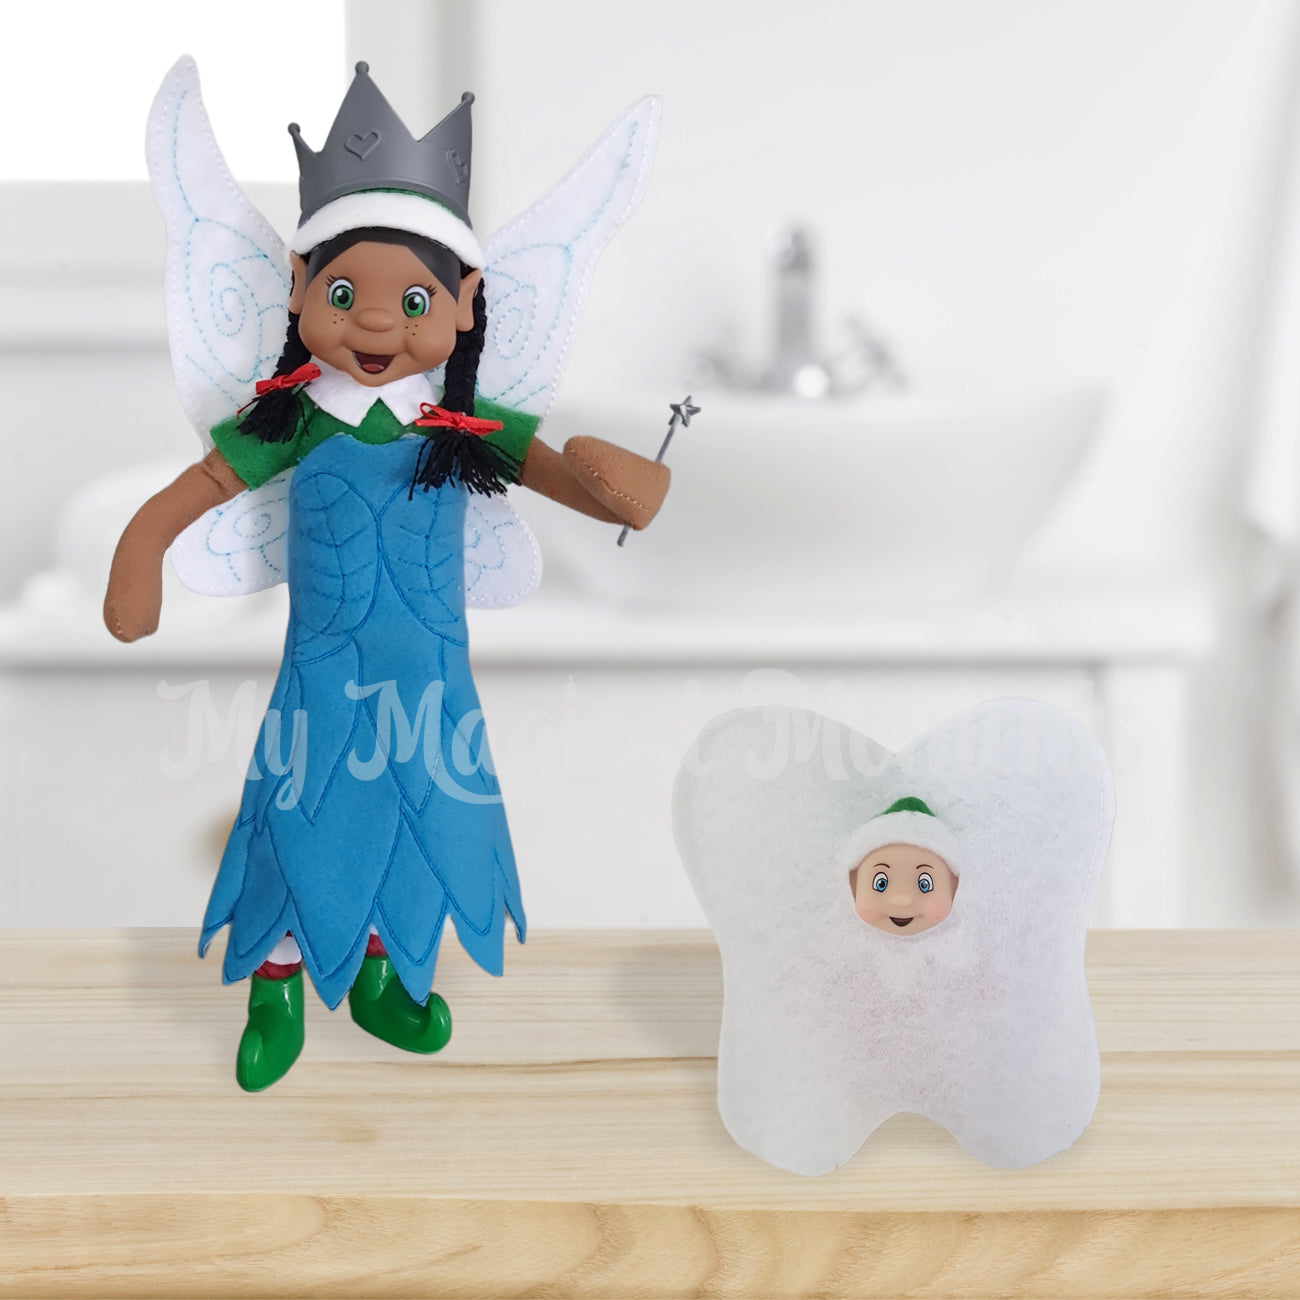 Black hair elf dressed as a fairy with a baby elf wearing a tooth costume